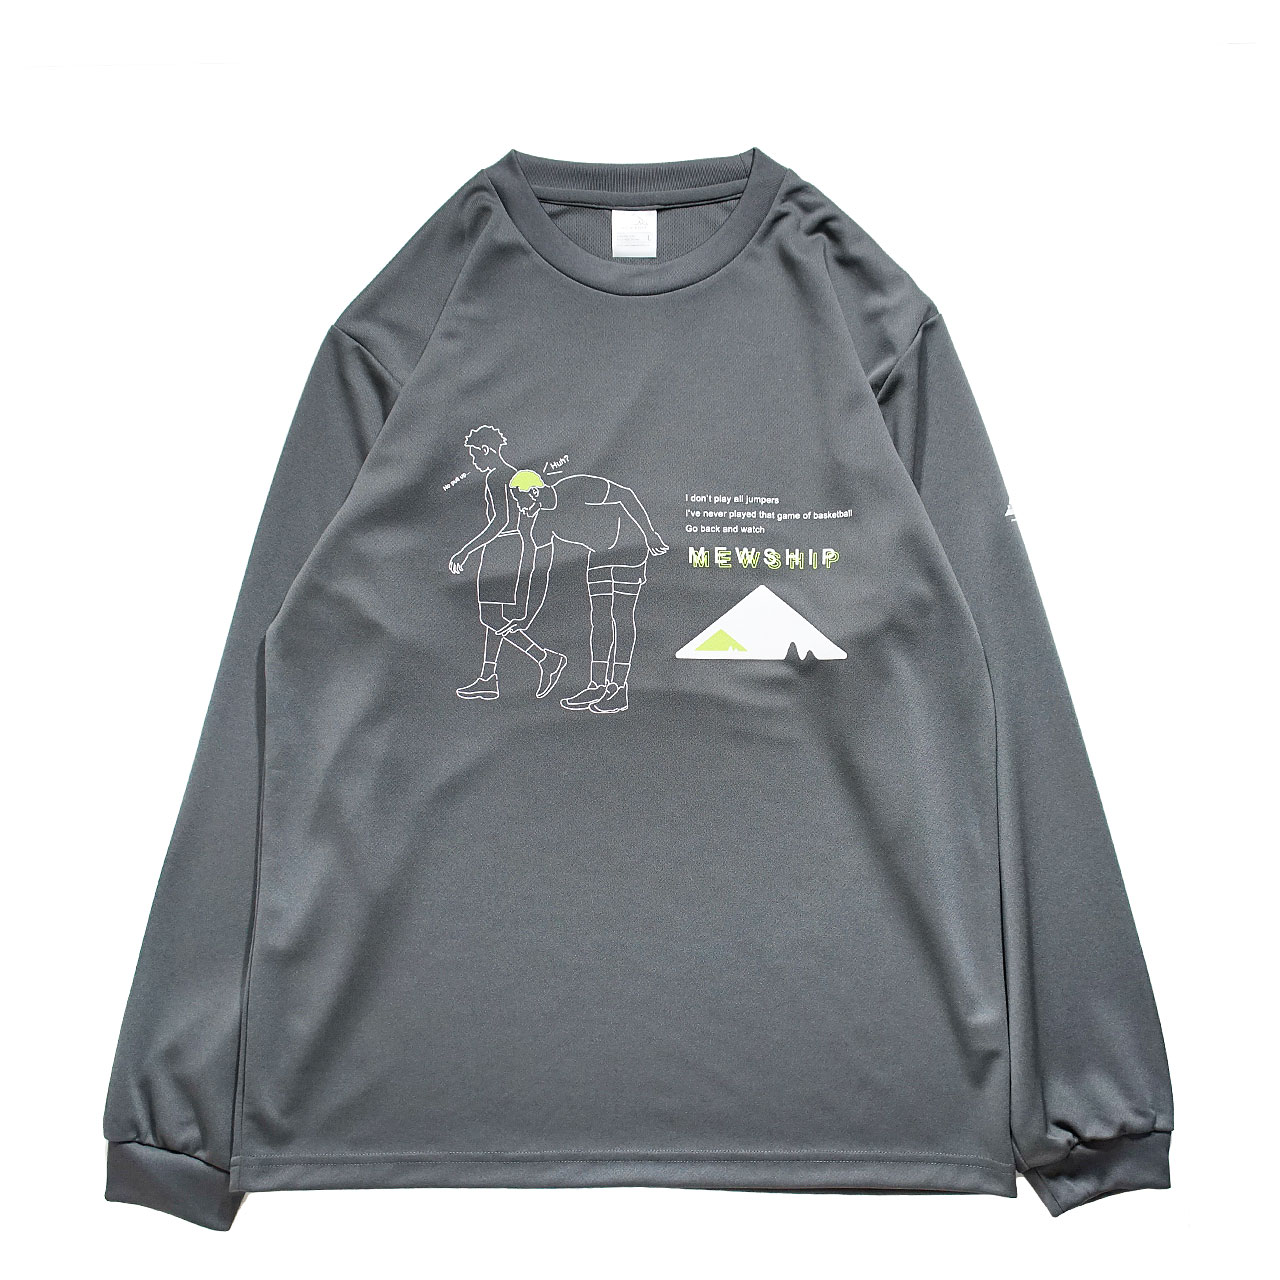 Mewship ロングTシャツ【Father-D】D.Gray×White×L.Green